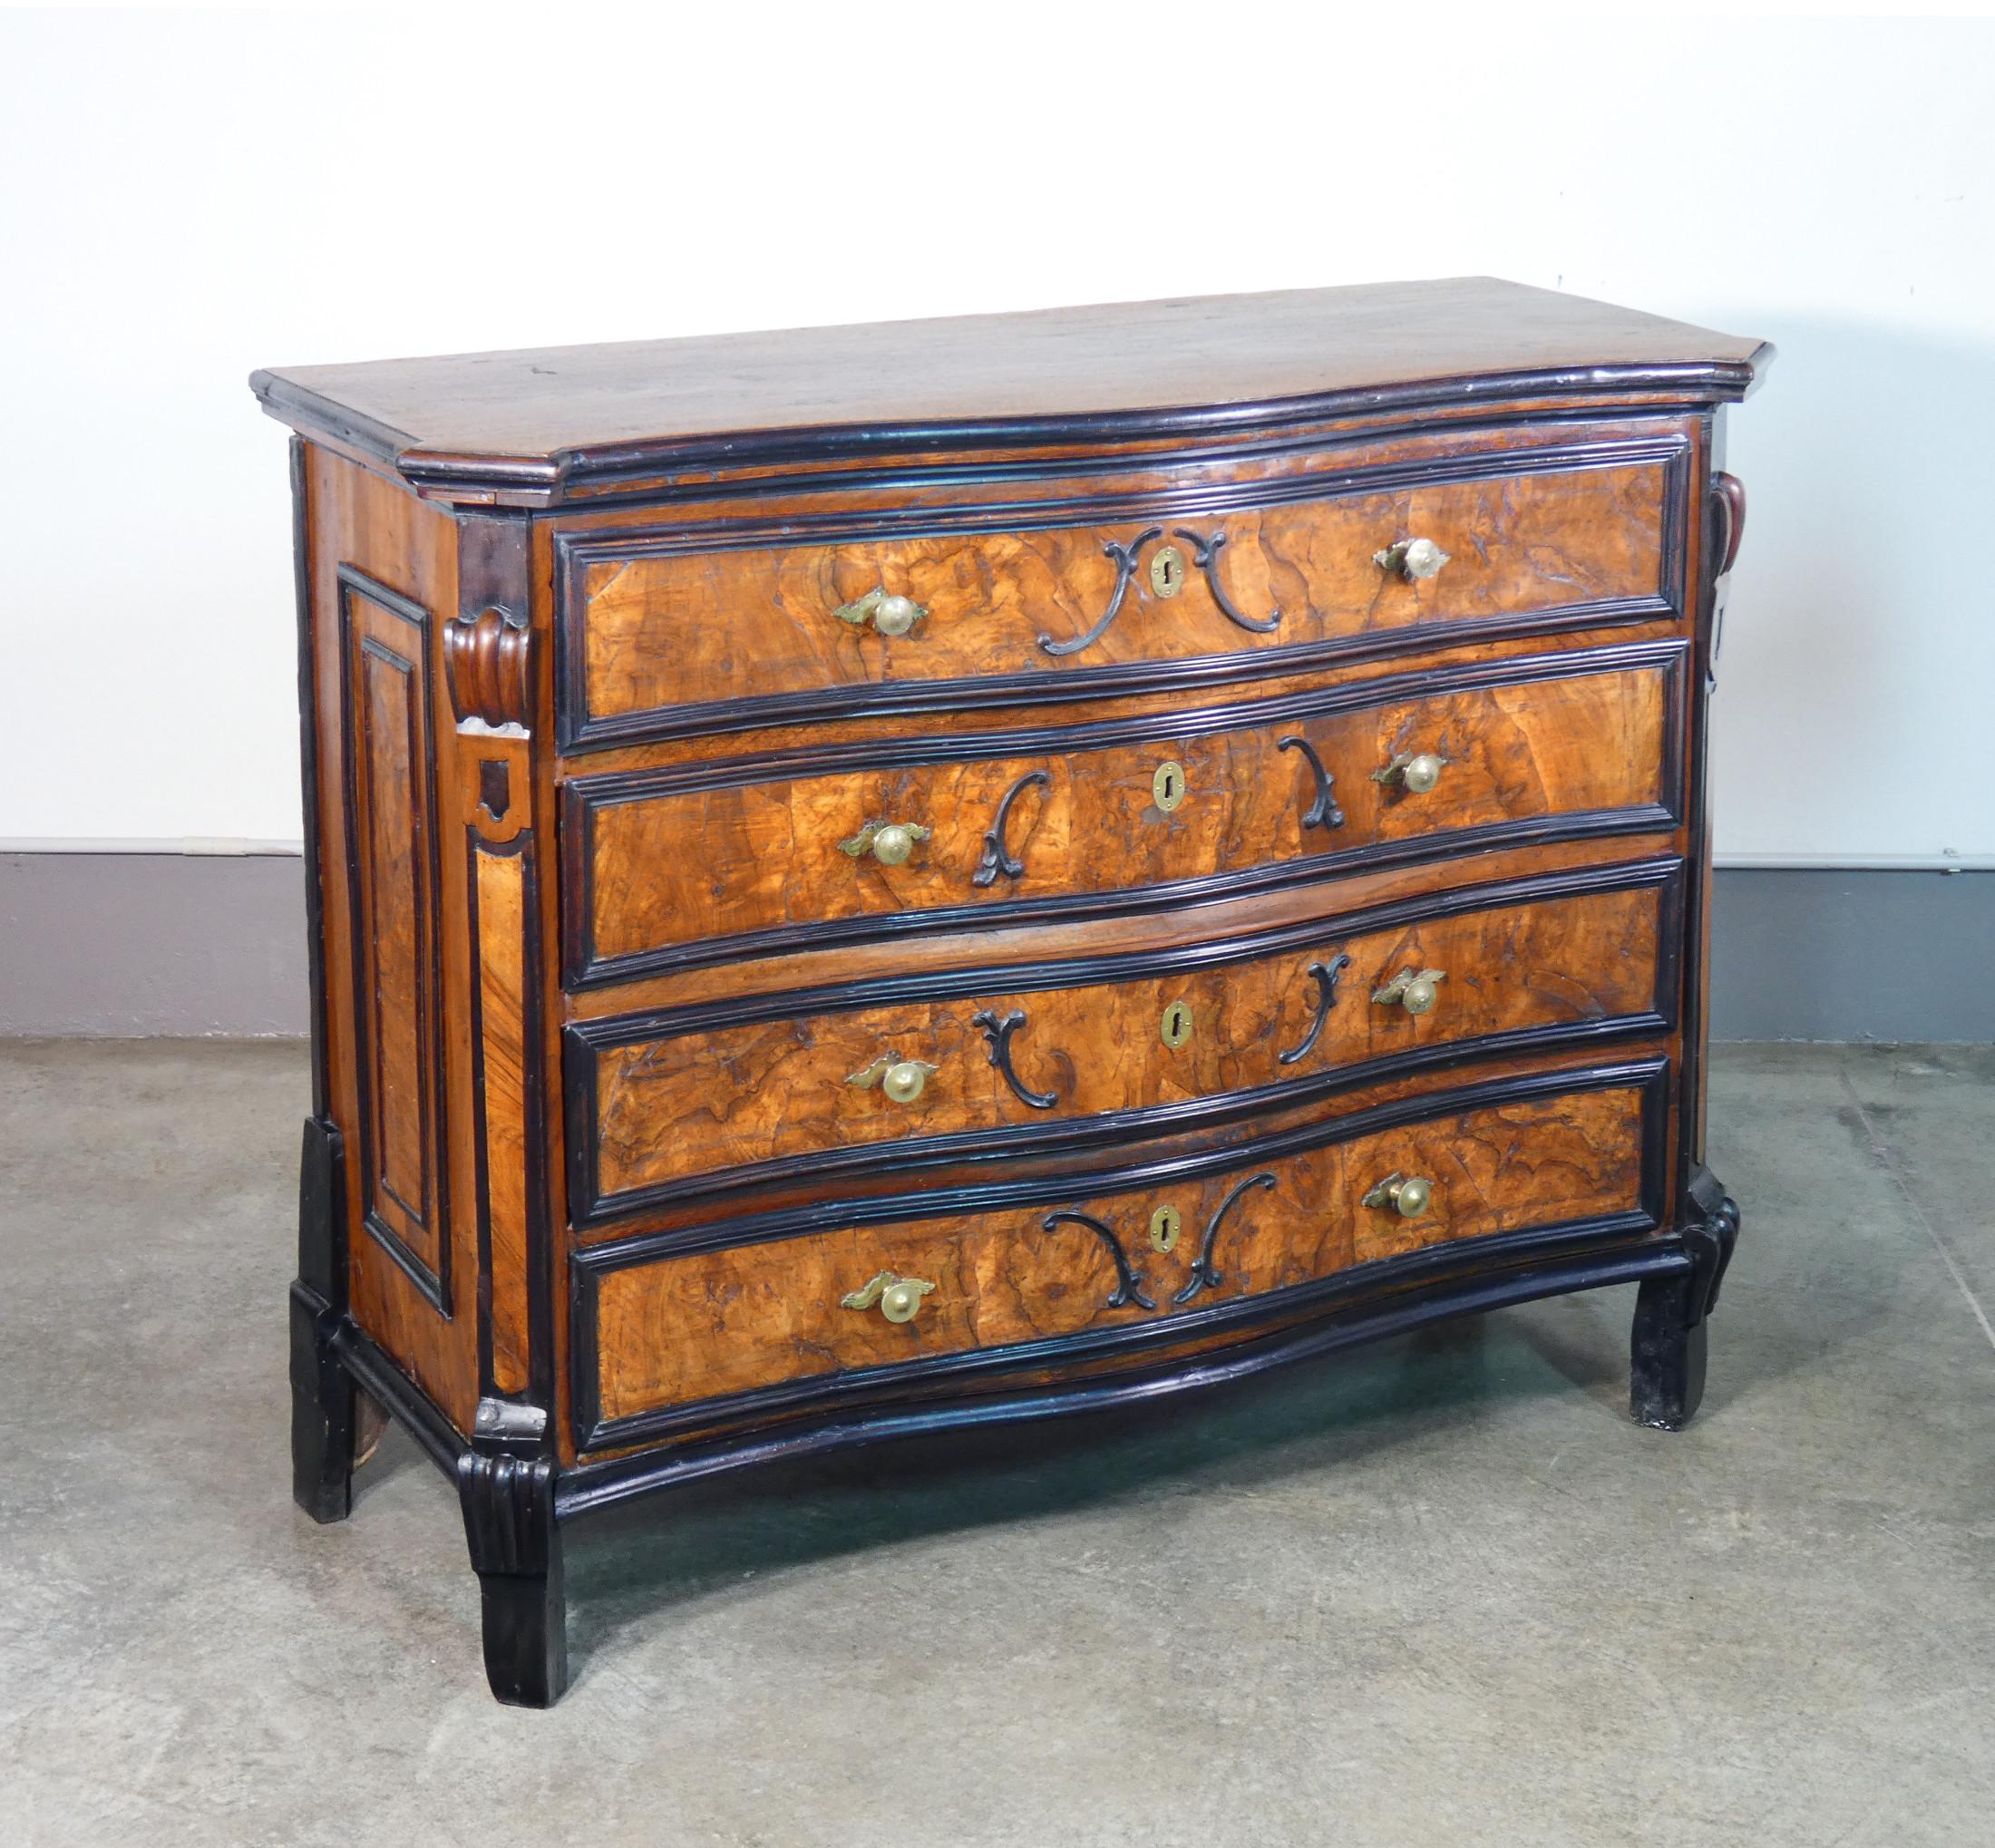 Original Louis XIV
chest of drawers
in wood and walnut briar
with ebonized details.
Four drawers

ORIGIN
Italy

PERIOD
Early eighteenth century

MODEL
Chest of drawers
with four drawers

MATERIALS
Walnut wood and walnut